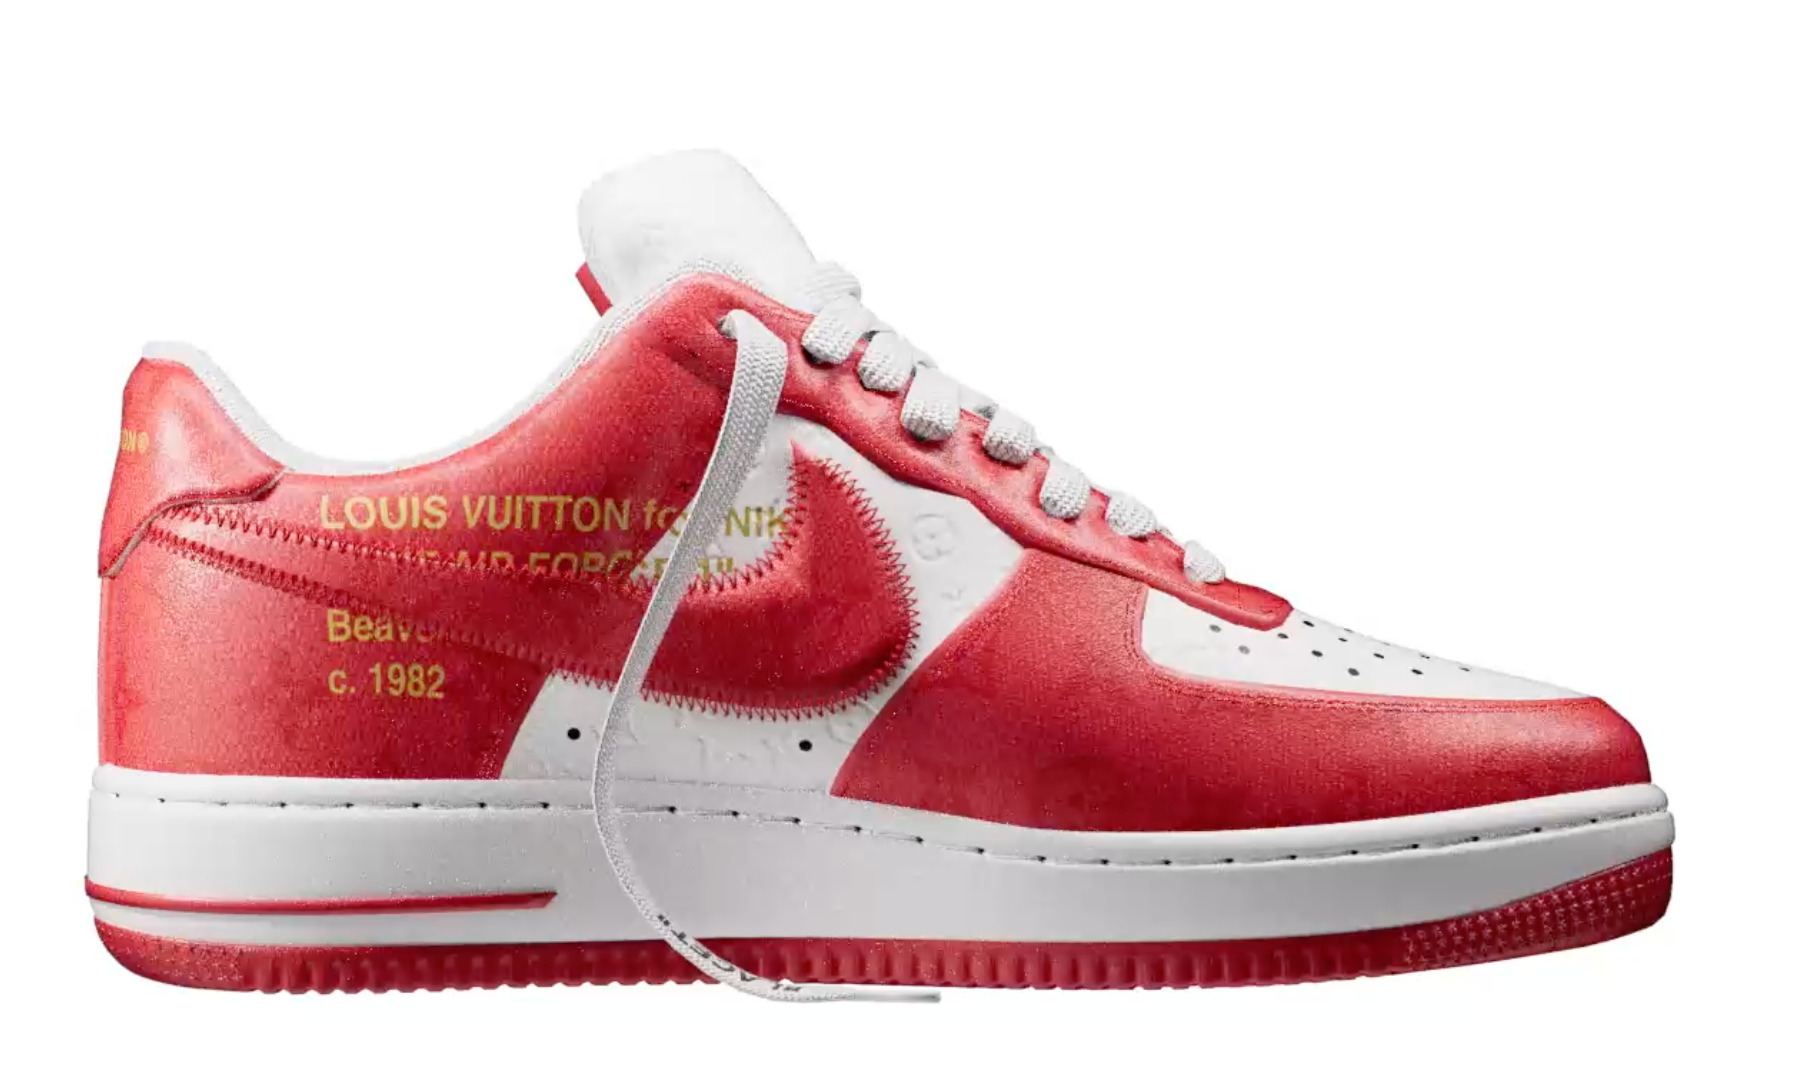 Louis Vuitton Nike Air Force 1 Low By Virgil Abloh Metallic Gold 100%  Authentic